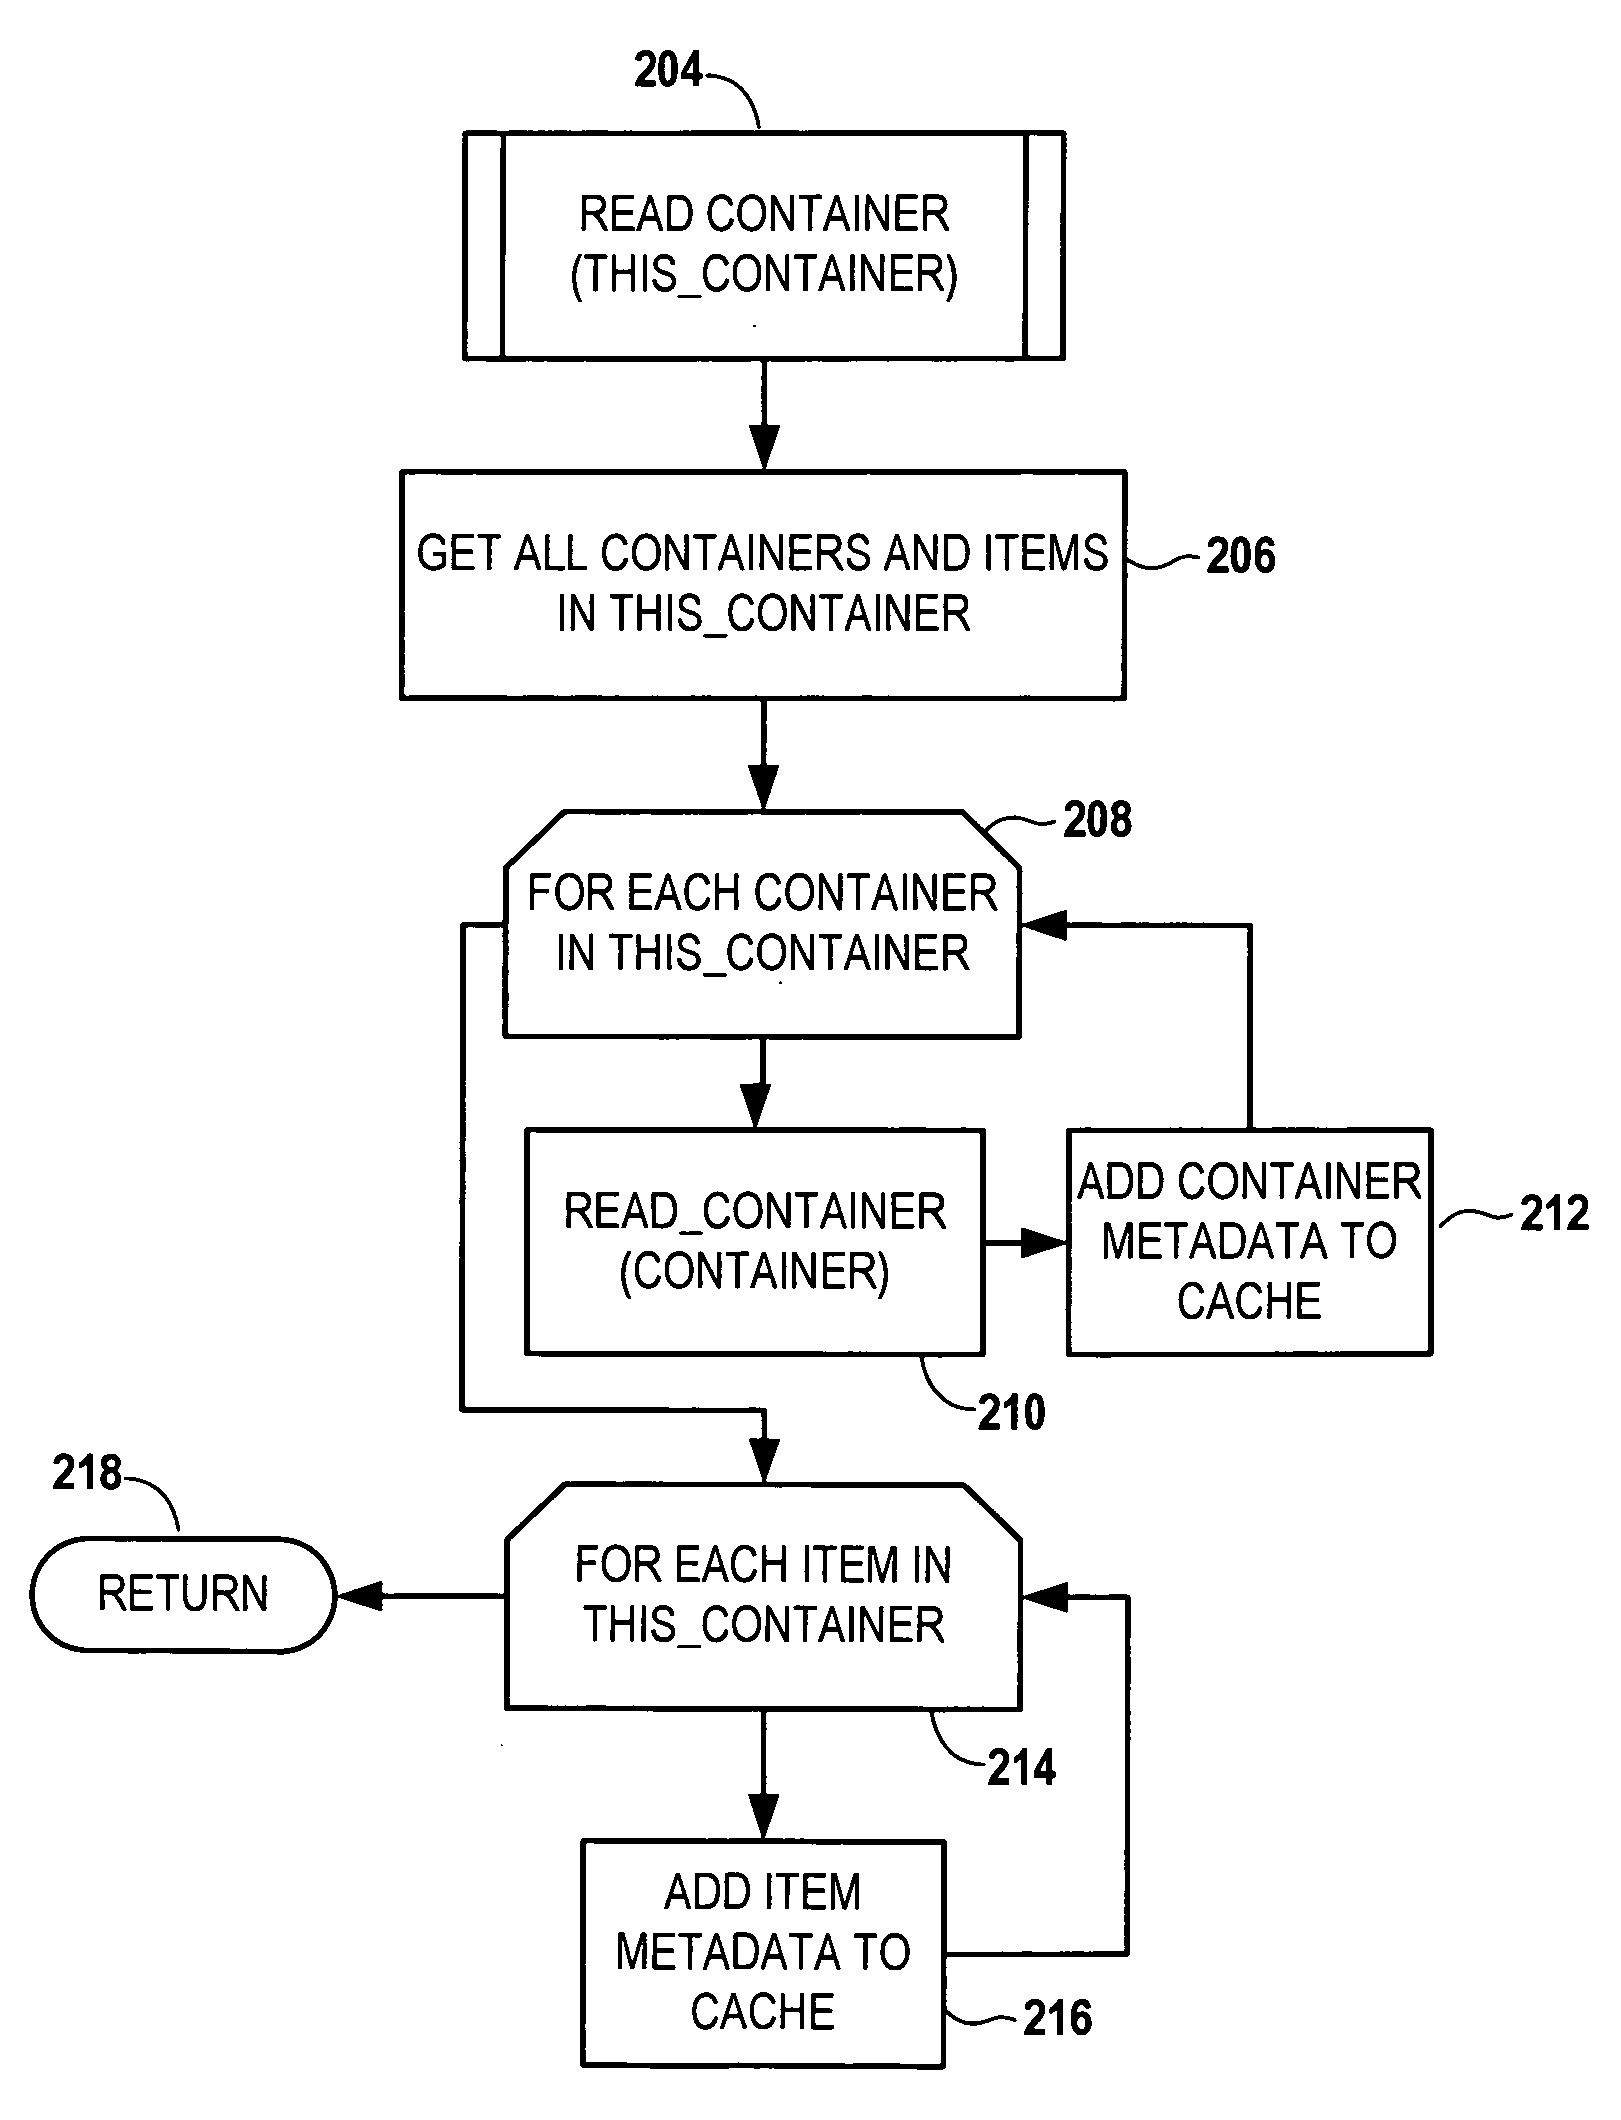 Caching directory server data for controlling the disposition of multimedia data on a network